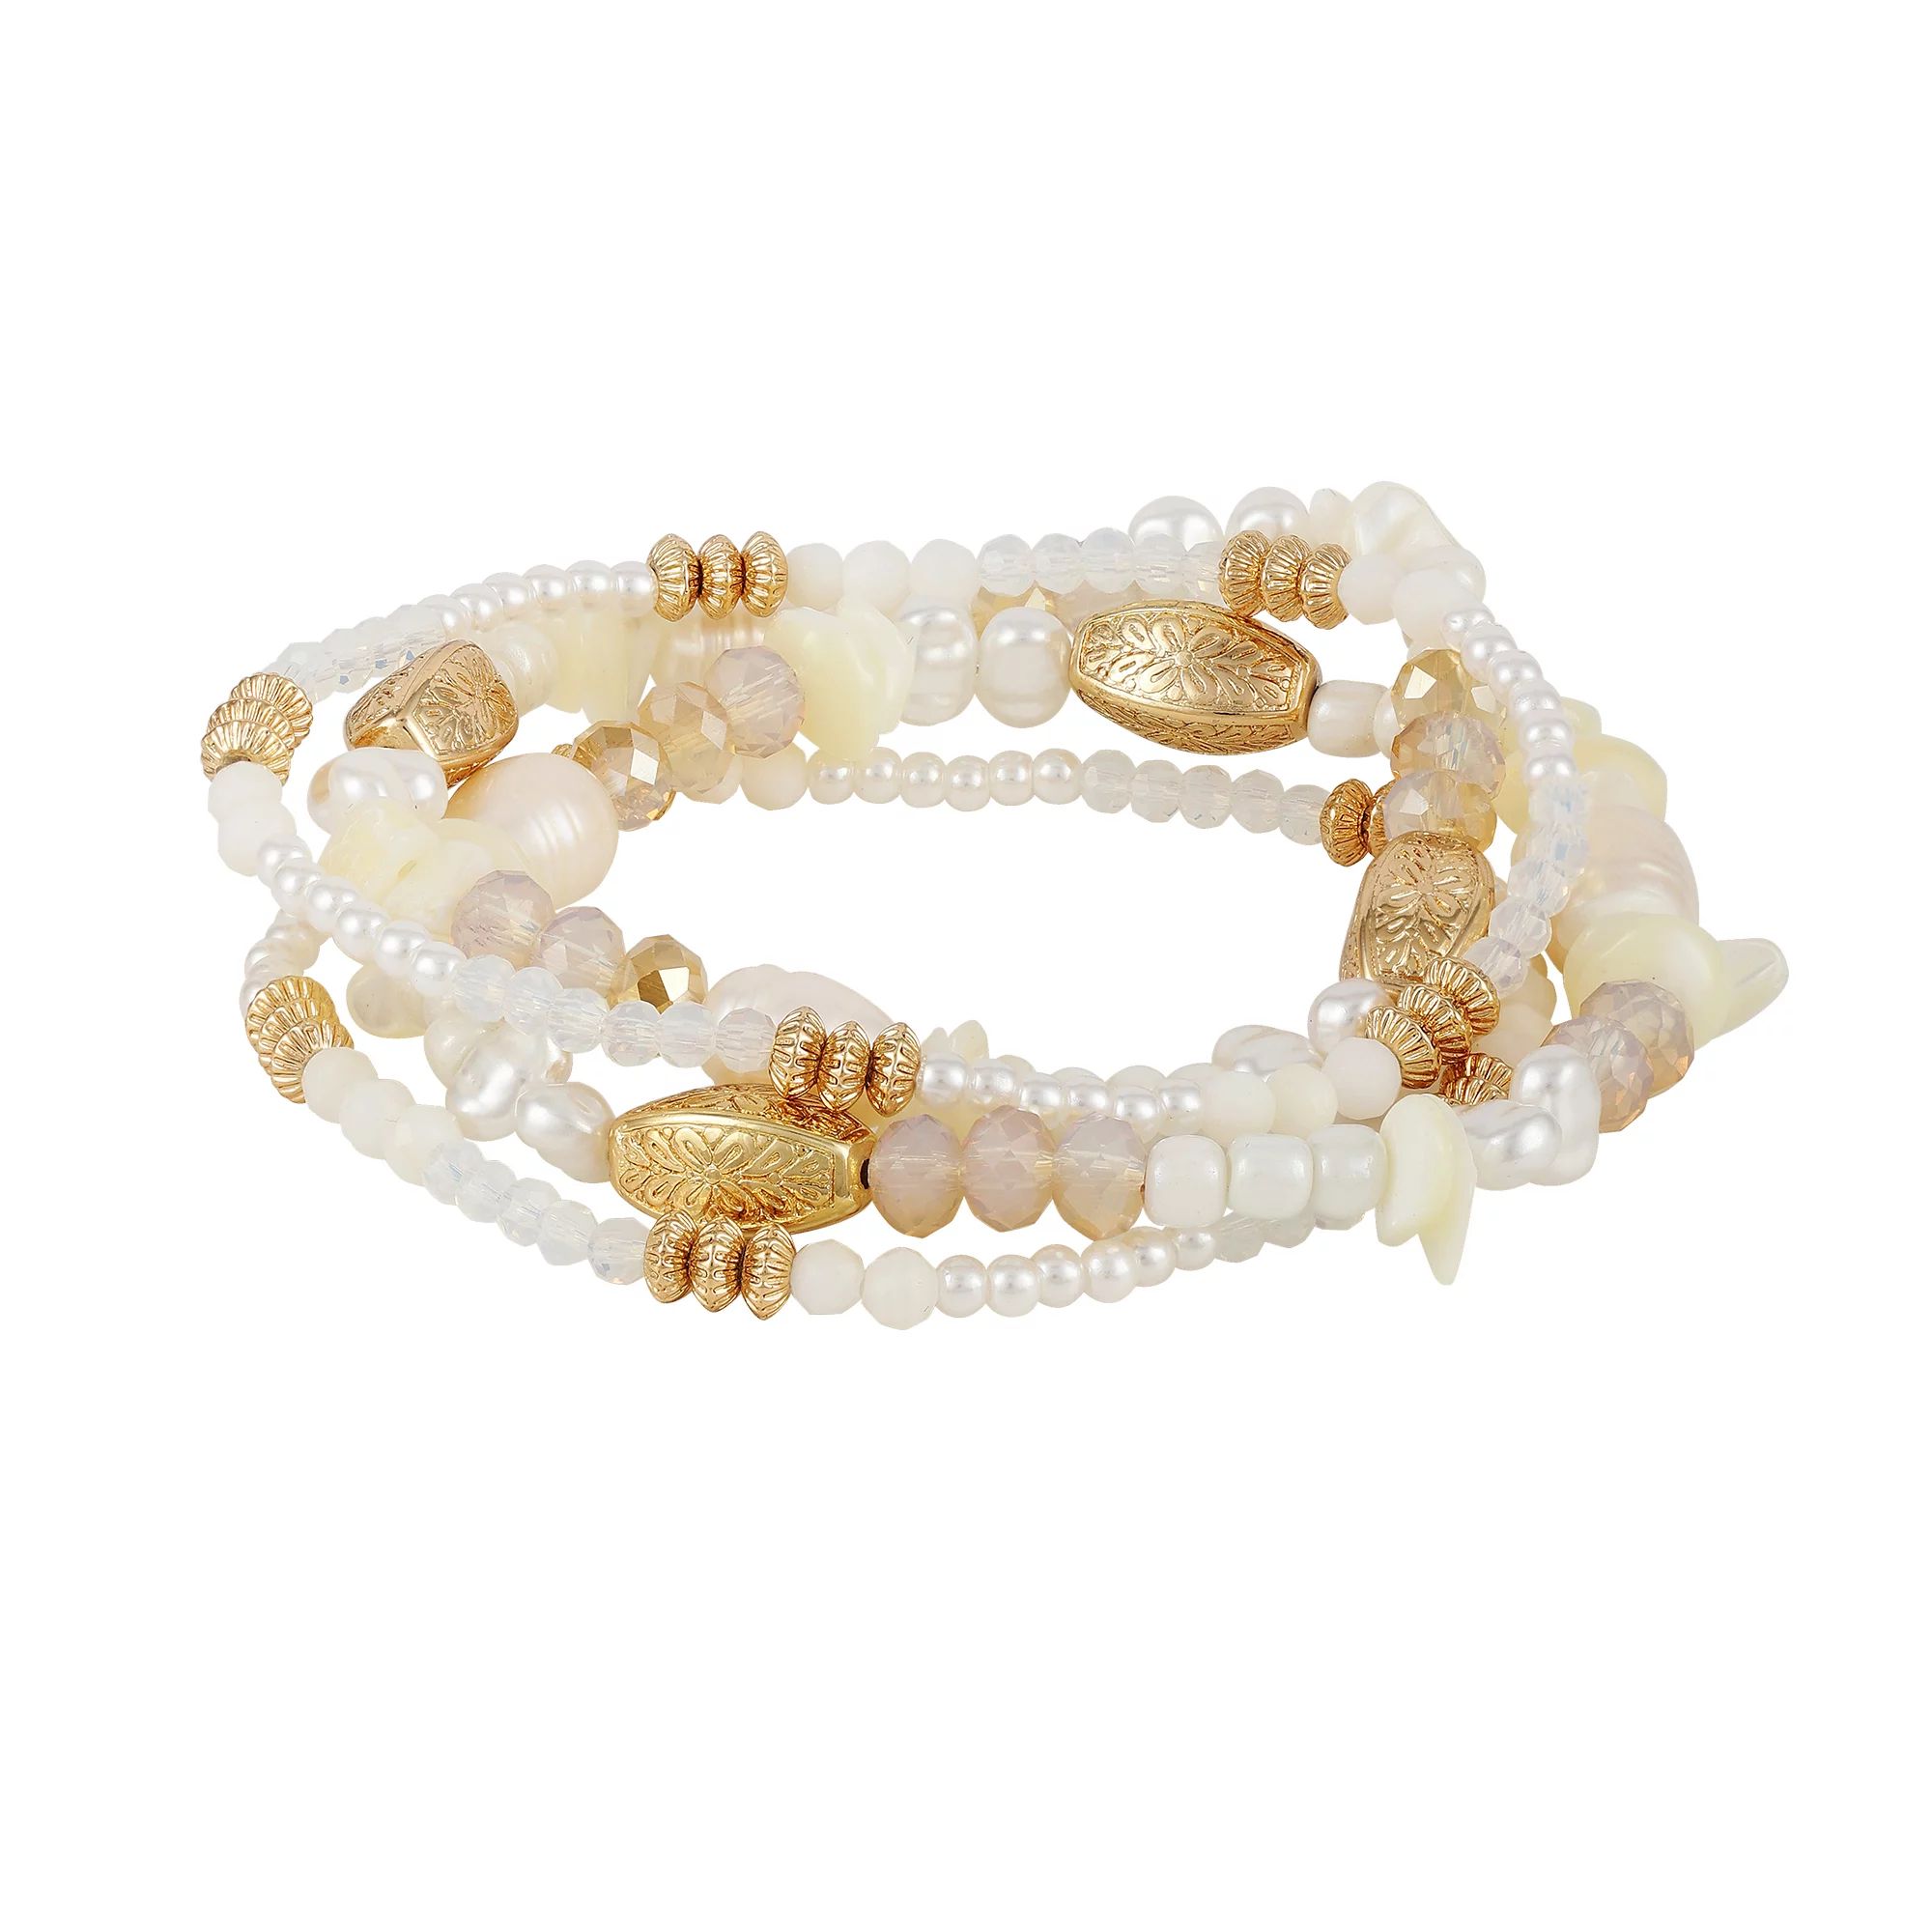 4 piece Organic Glass Pearl and Shell Beaded Stretch 7" Bracelet Set in Imitation Gold Plating. -... | Walmart (US)